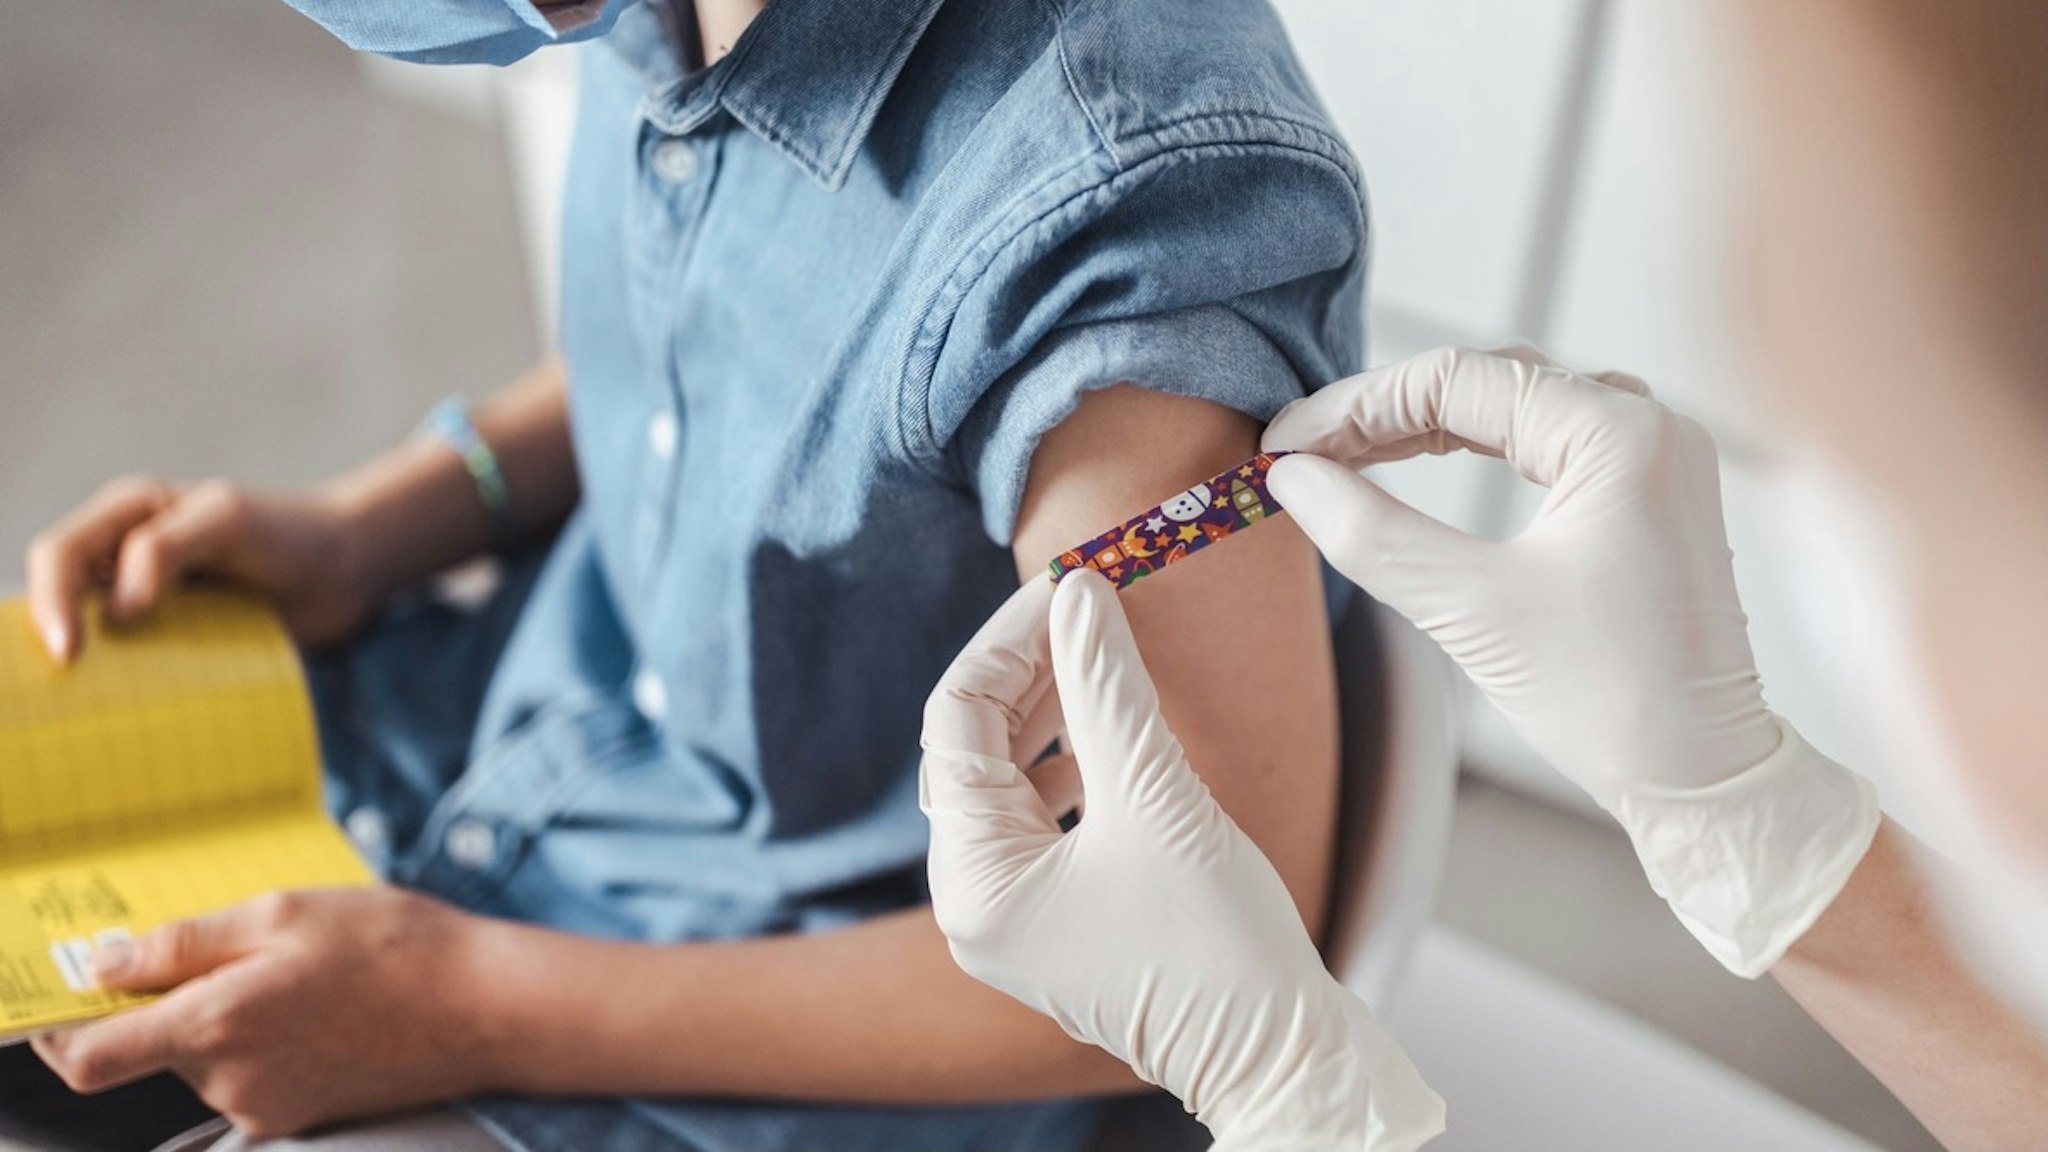 Nurse putting adhesive bandage on boy's arm at vaccination center - stock photo Westend61 via Getty Images